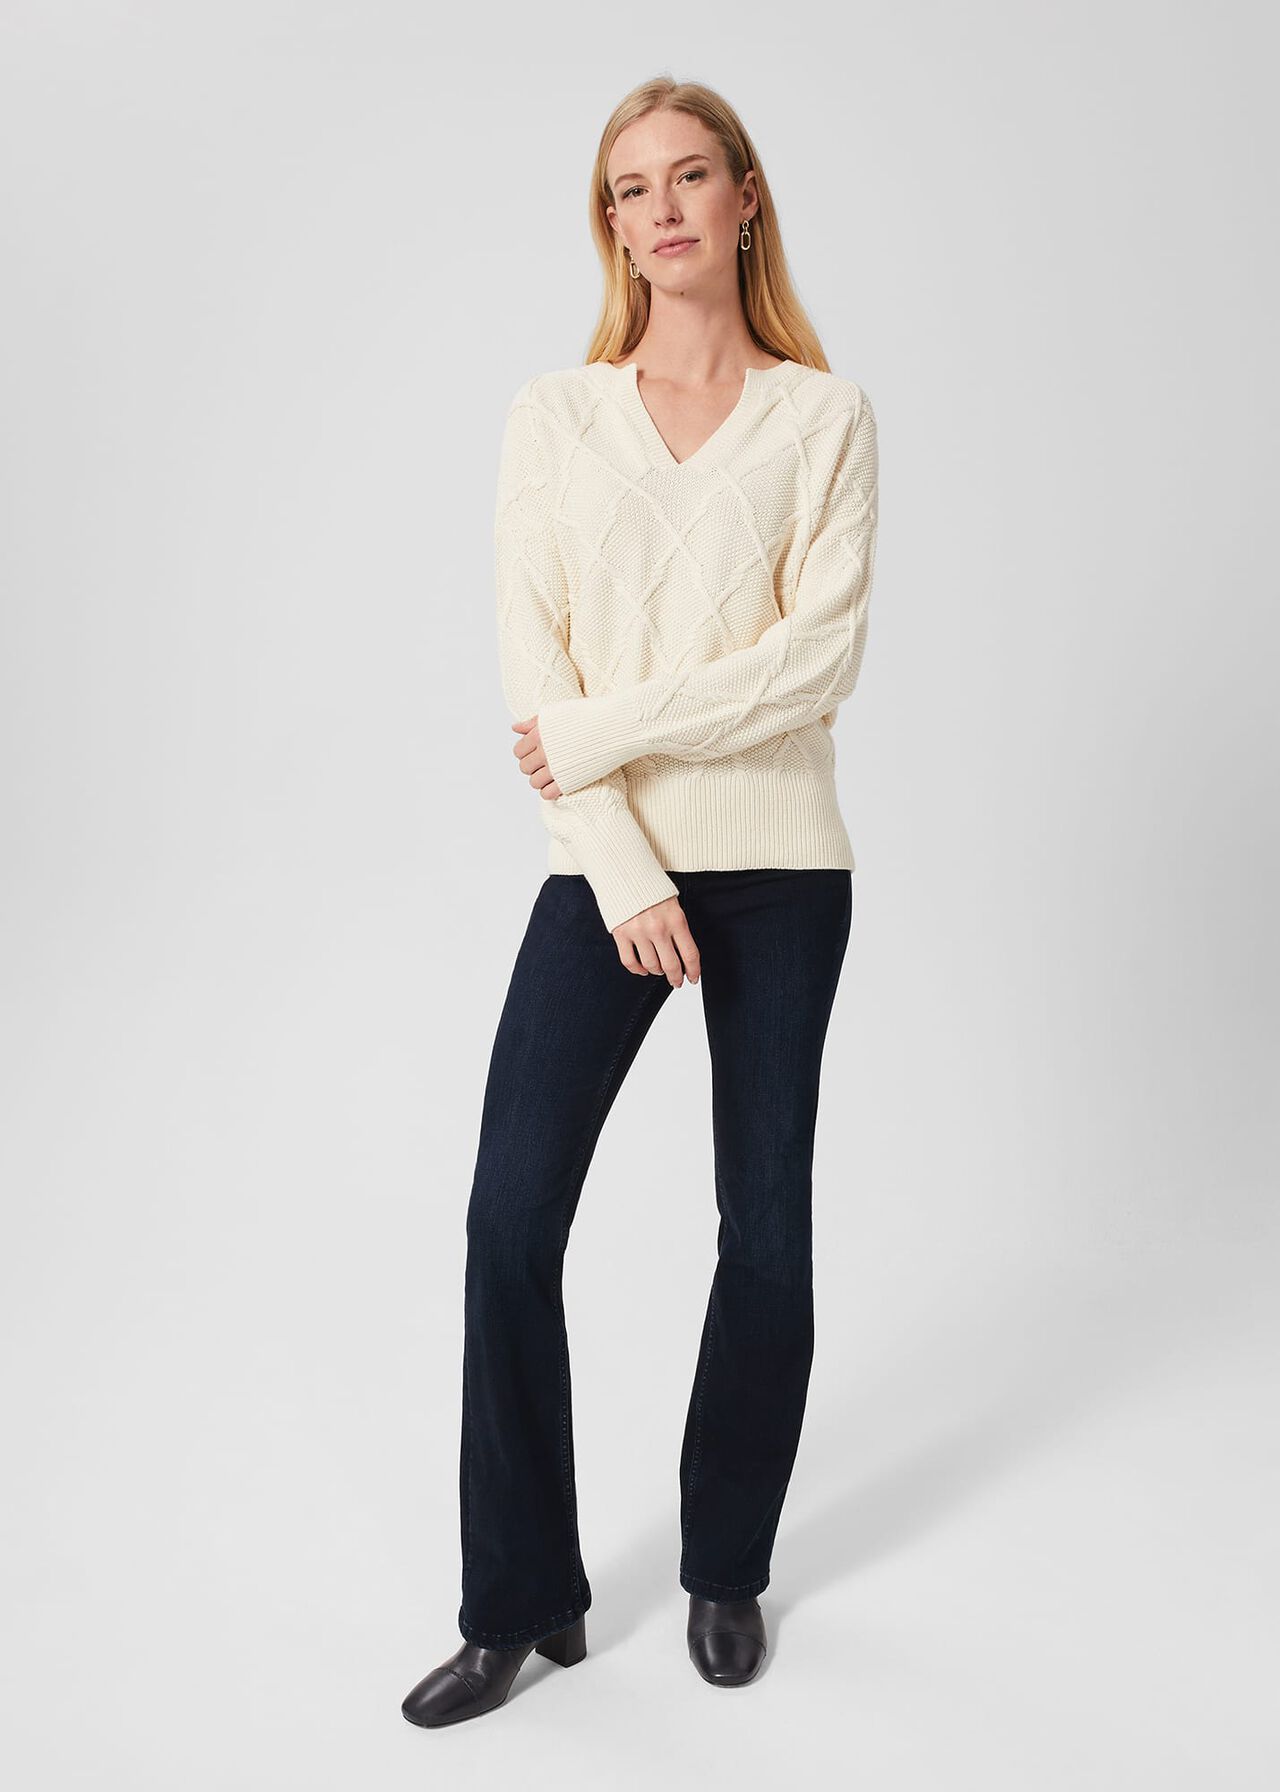 Cianna Cotton Sweater, Ivory, hi-res